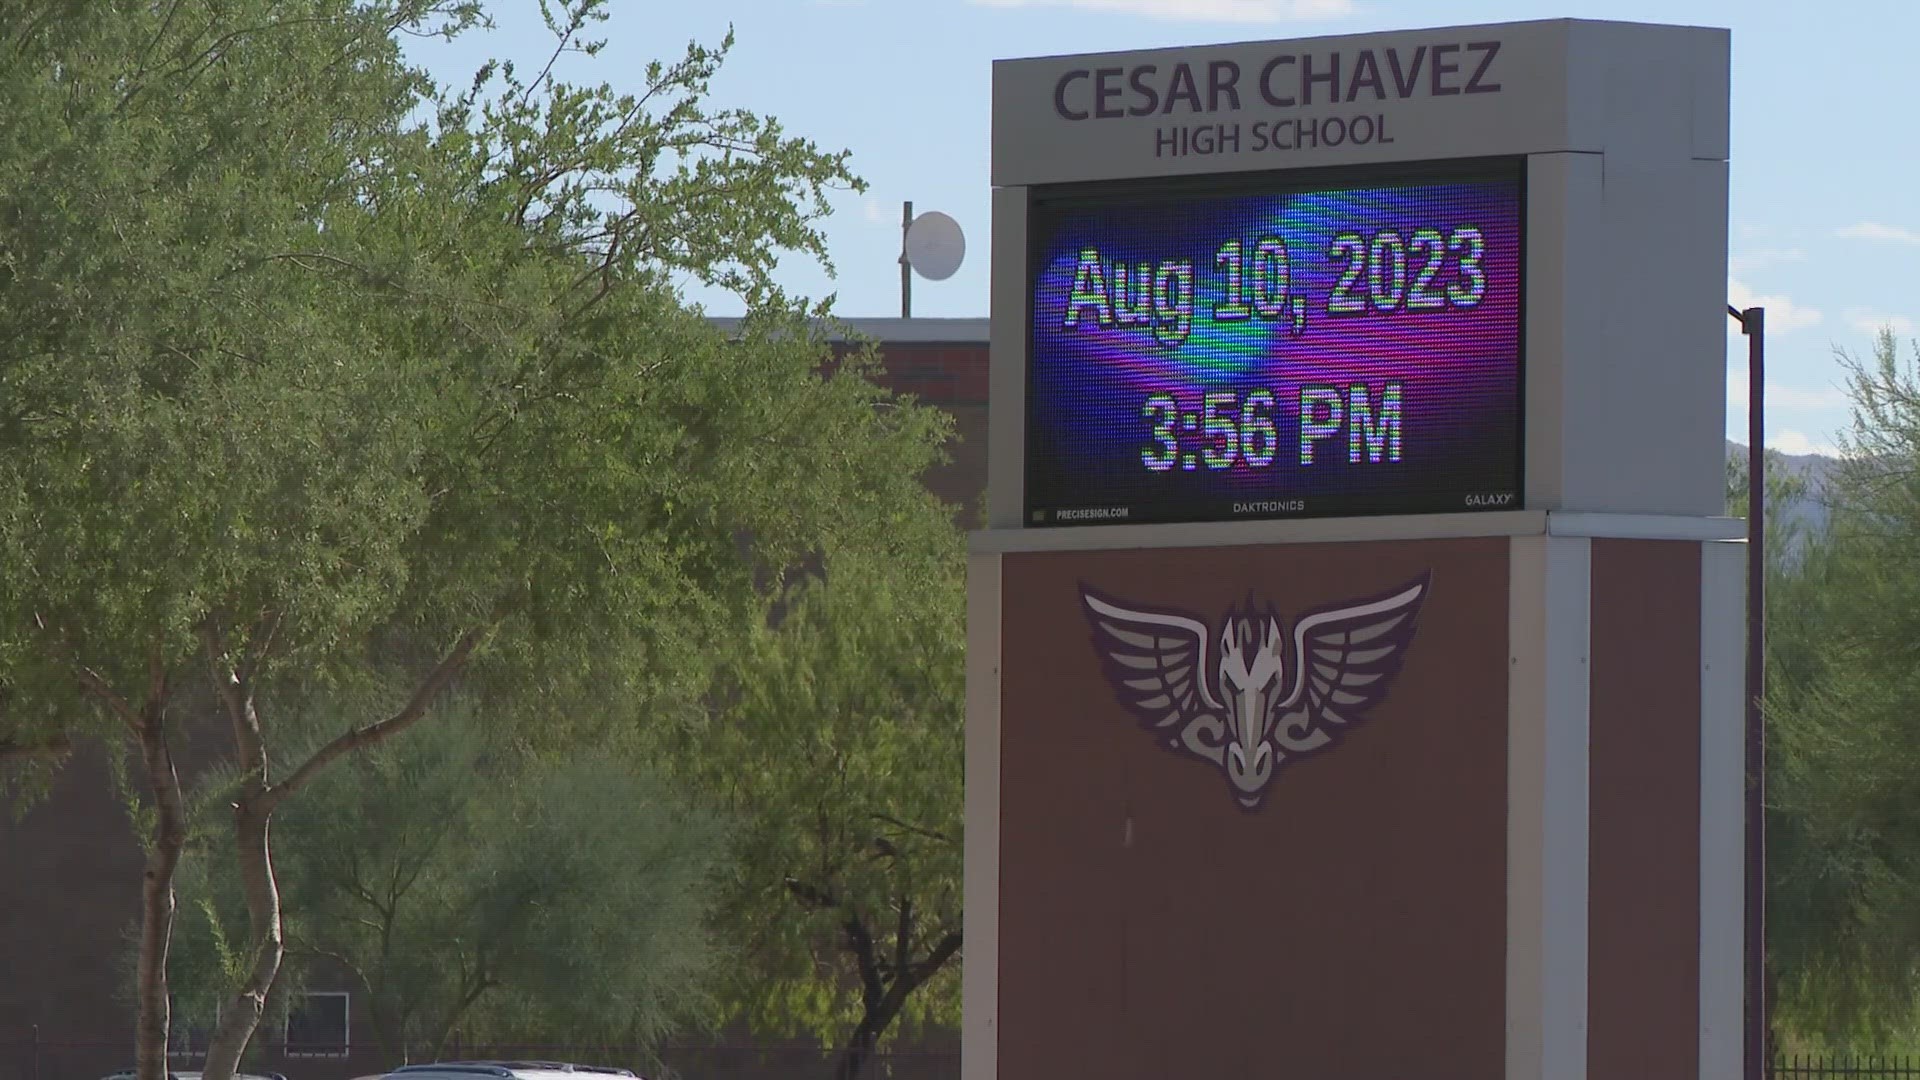 School officials say the two incidents reported Thursday morning are unrelated.